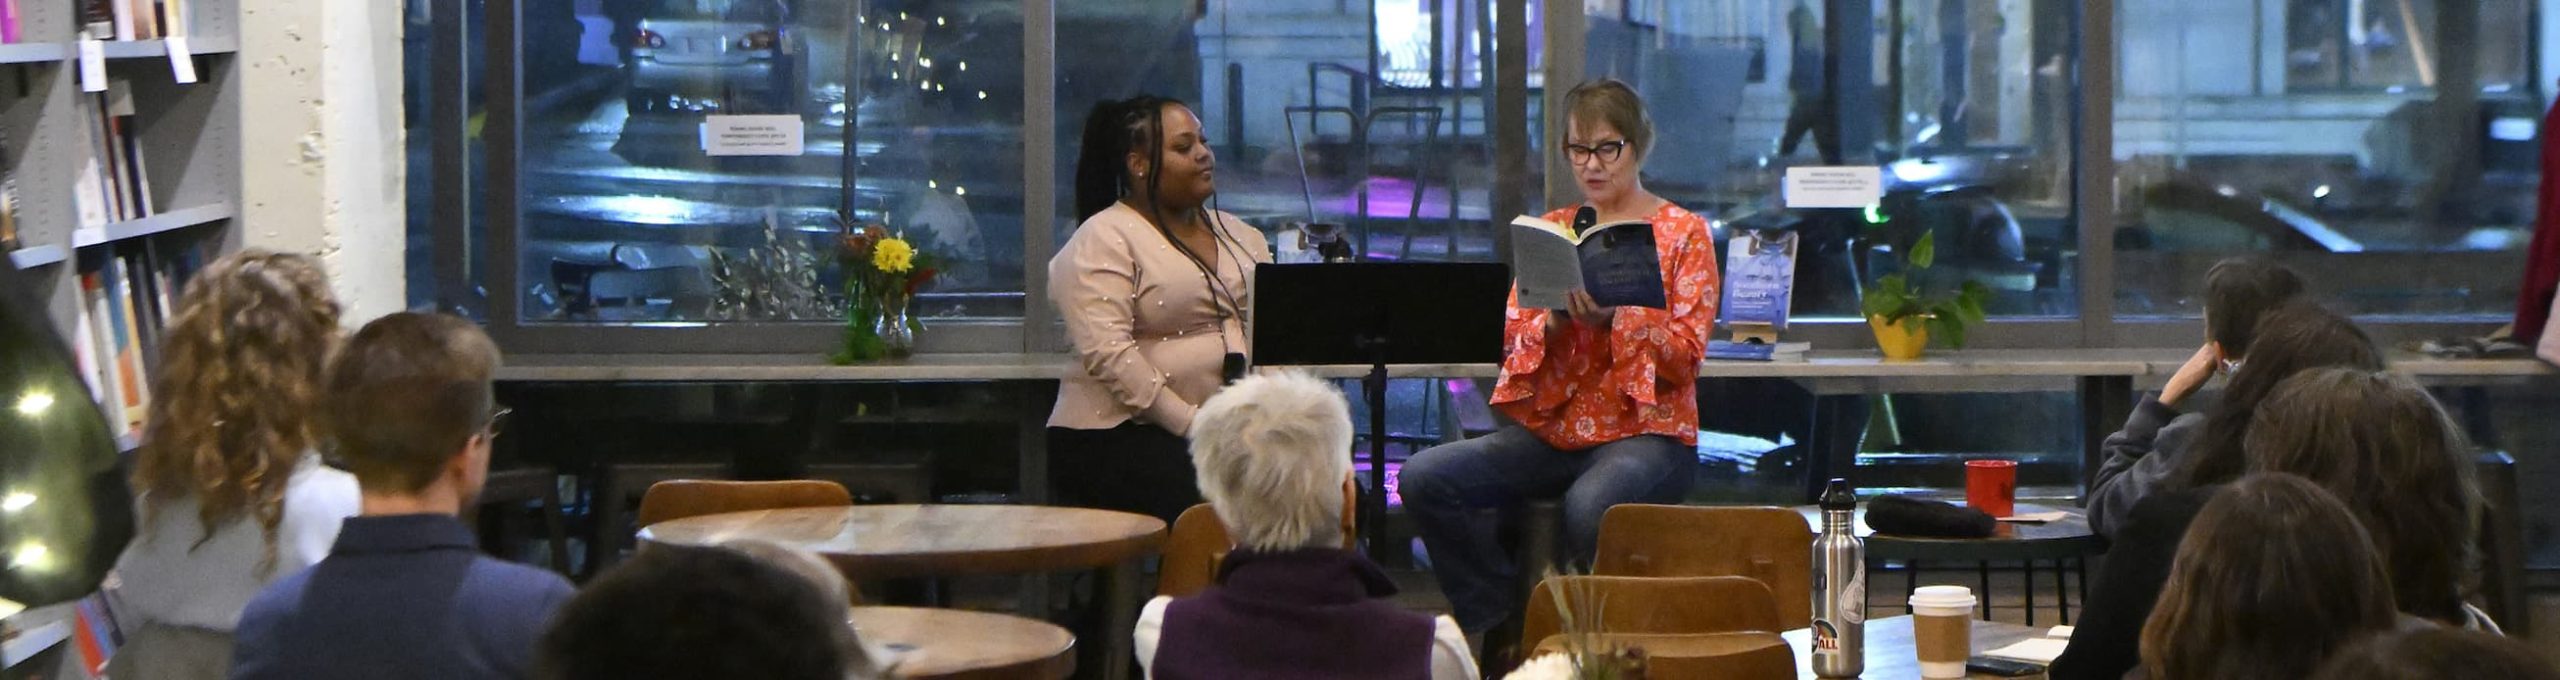 Humanities in the Village event with Dr. Elizabeth Bronwyn Boyd (r) reading her book, Southern Beauty: Race, Ritual, and Memory in the Modern South. Samanda Robinson (l), PhD candidate, English, moderated the event.